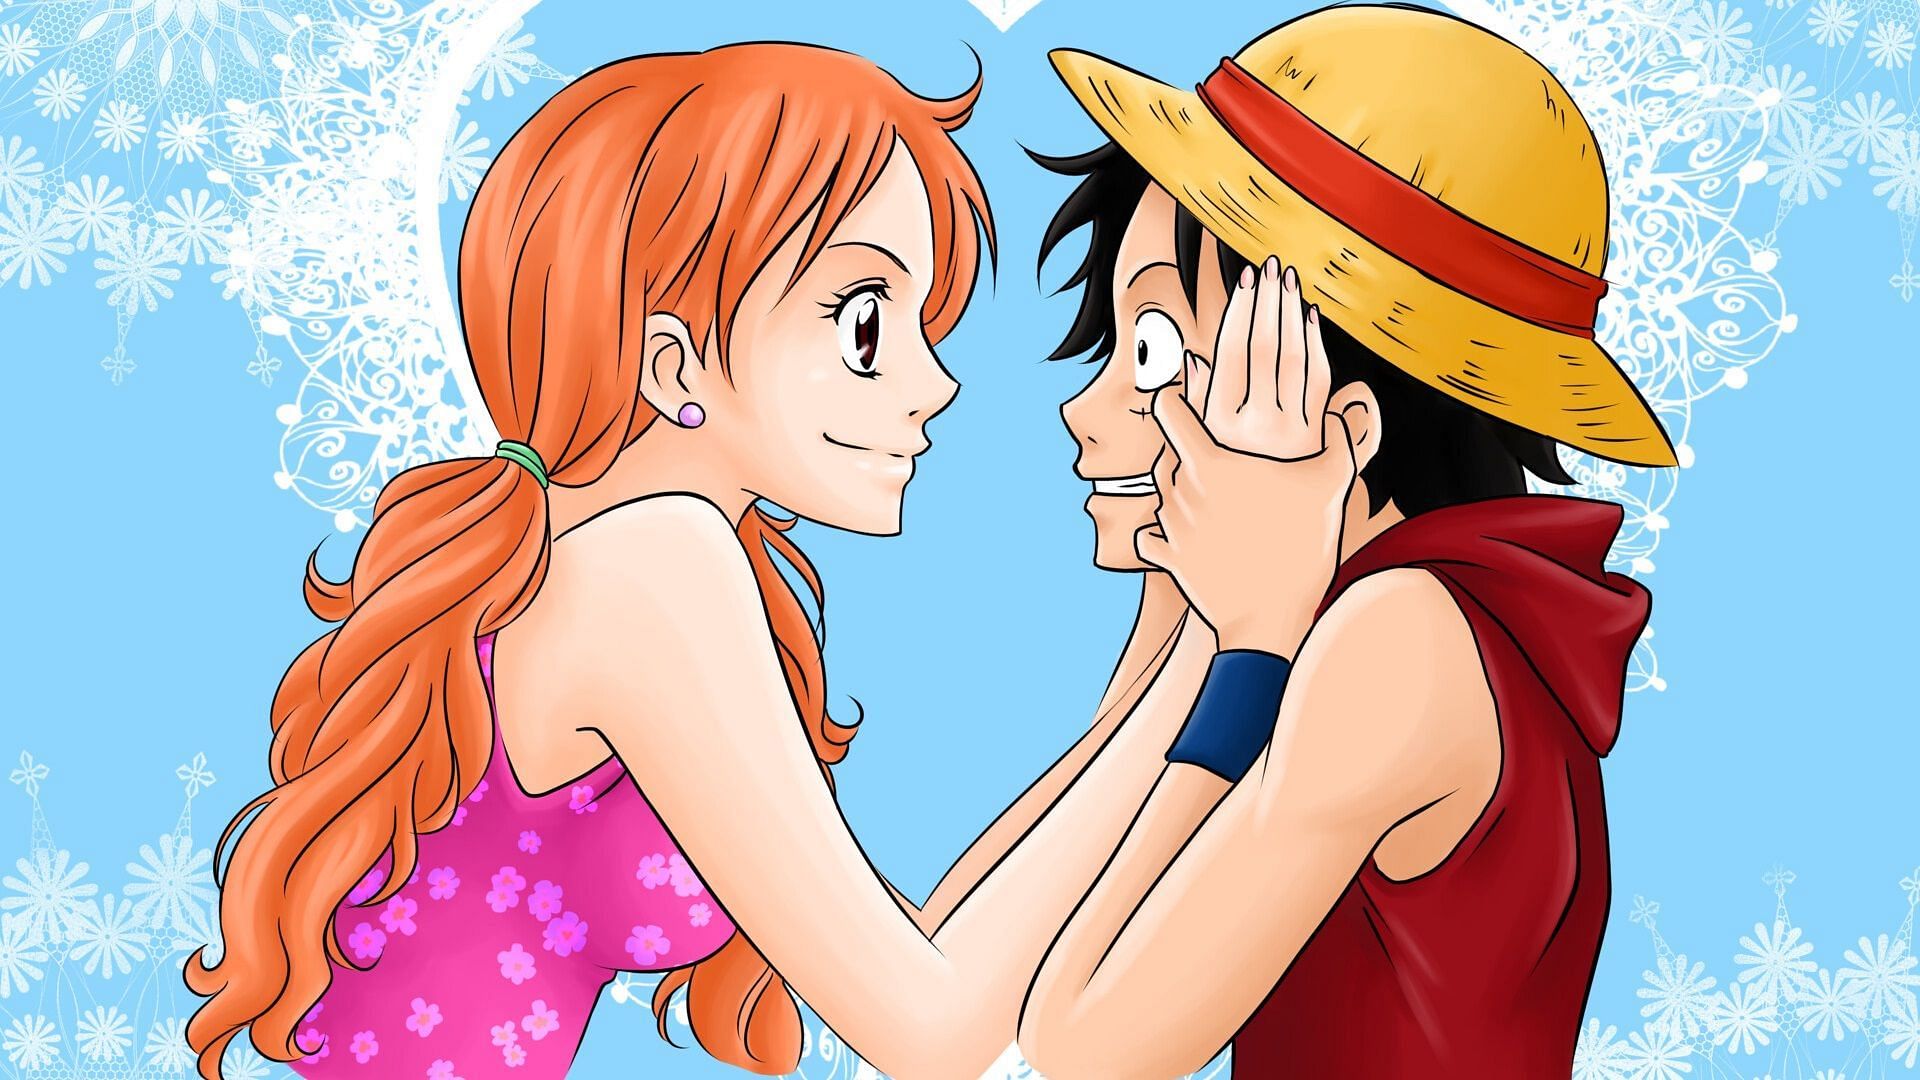 Nami Cries And Asks Luffy For Help